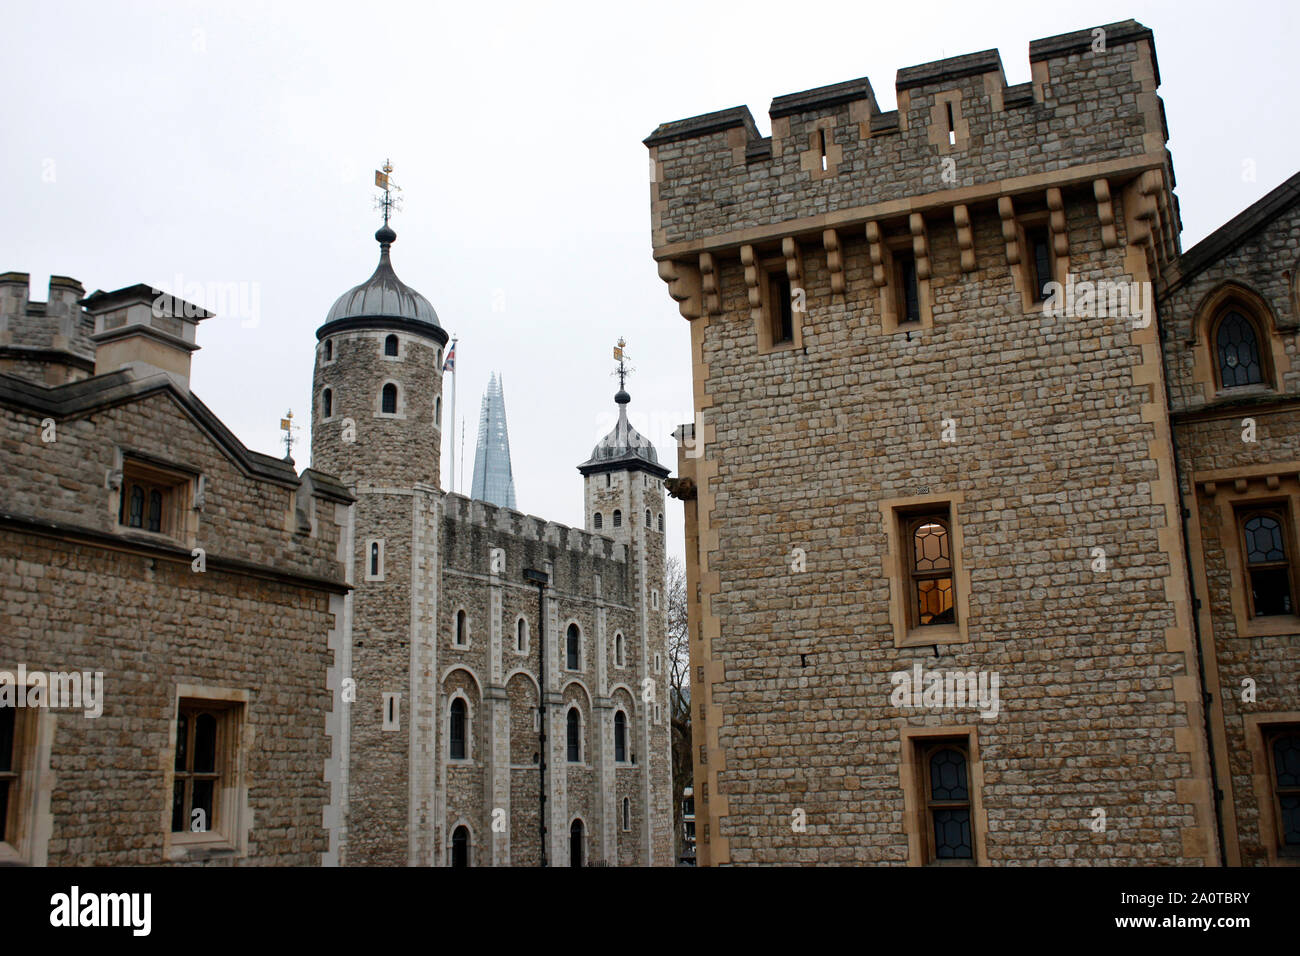 White tower at London built by William the Conqueror Stock Photo